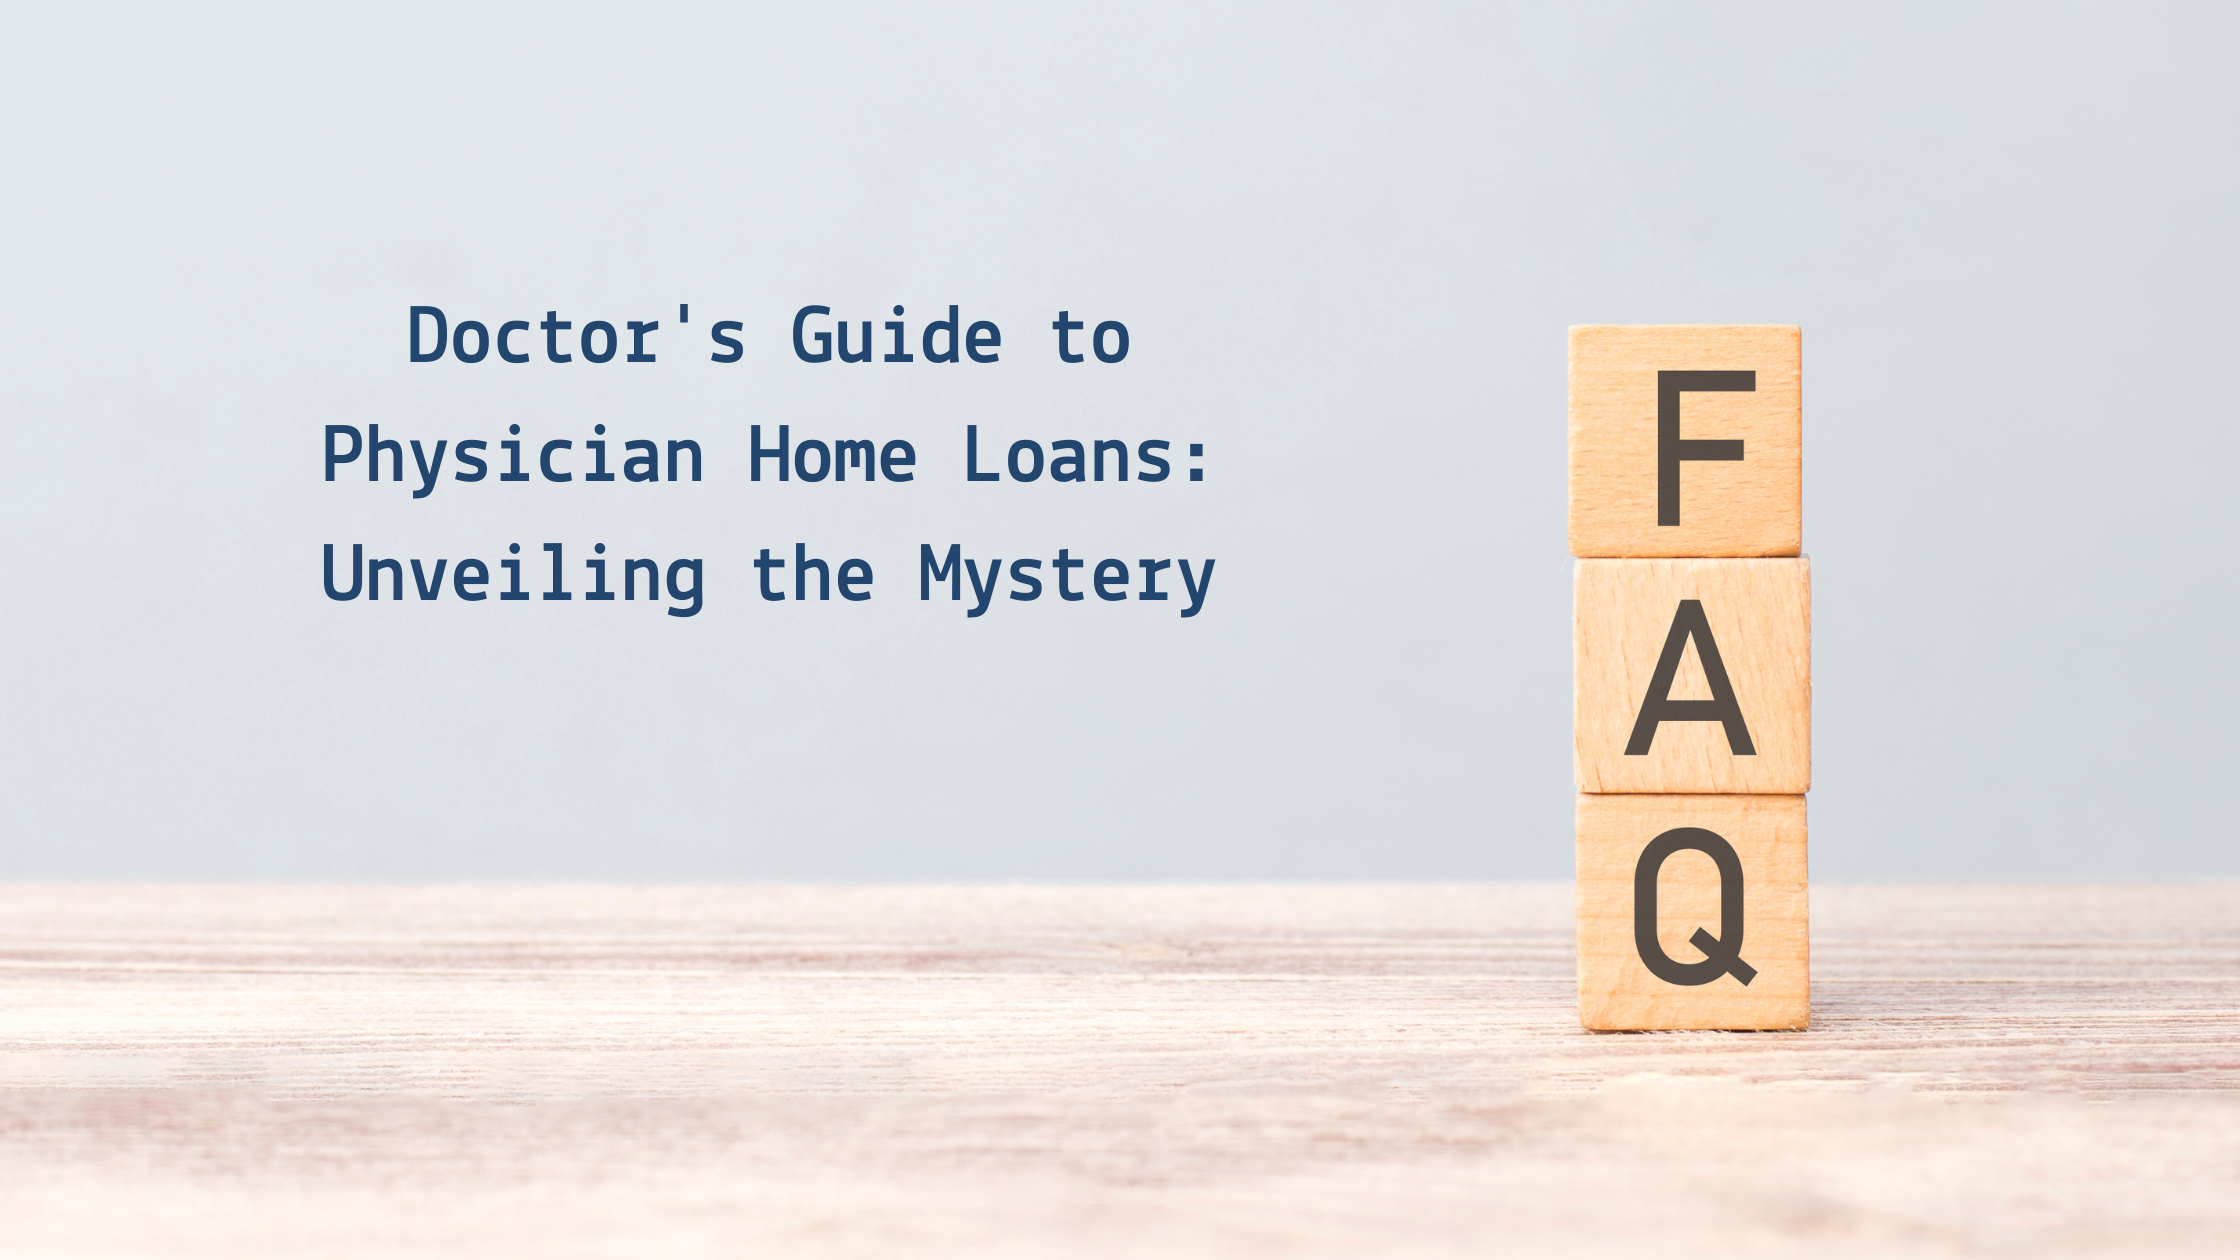 Doctor's Guide to Physician Home Loans